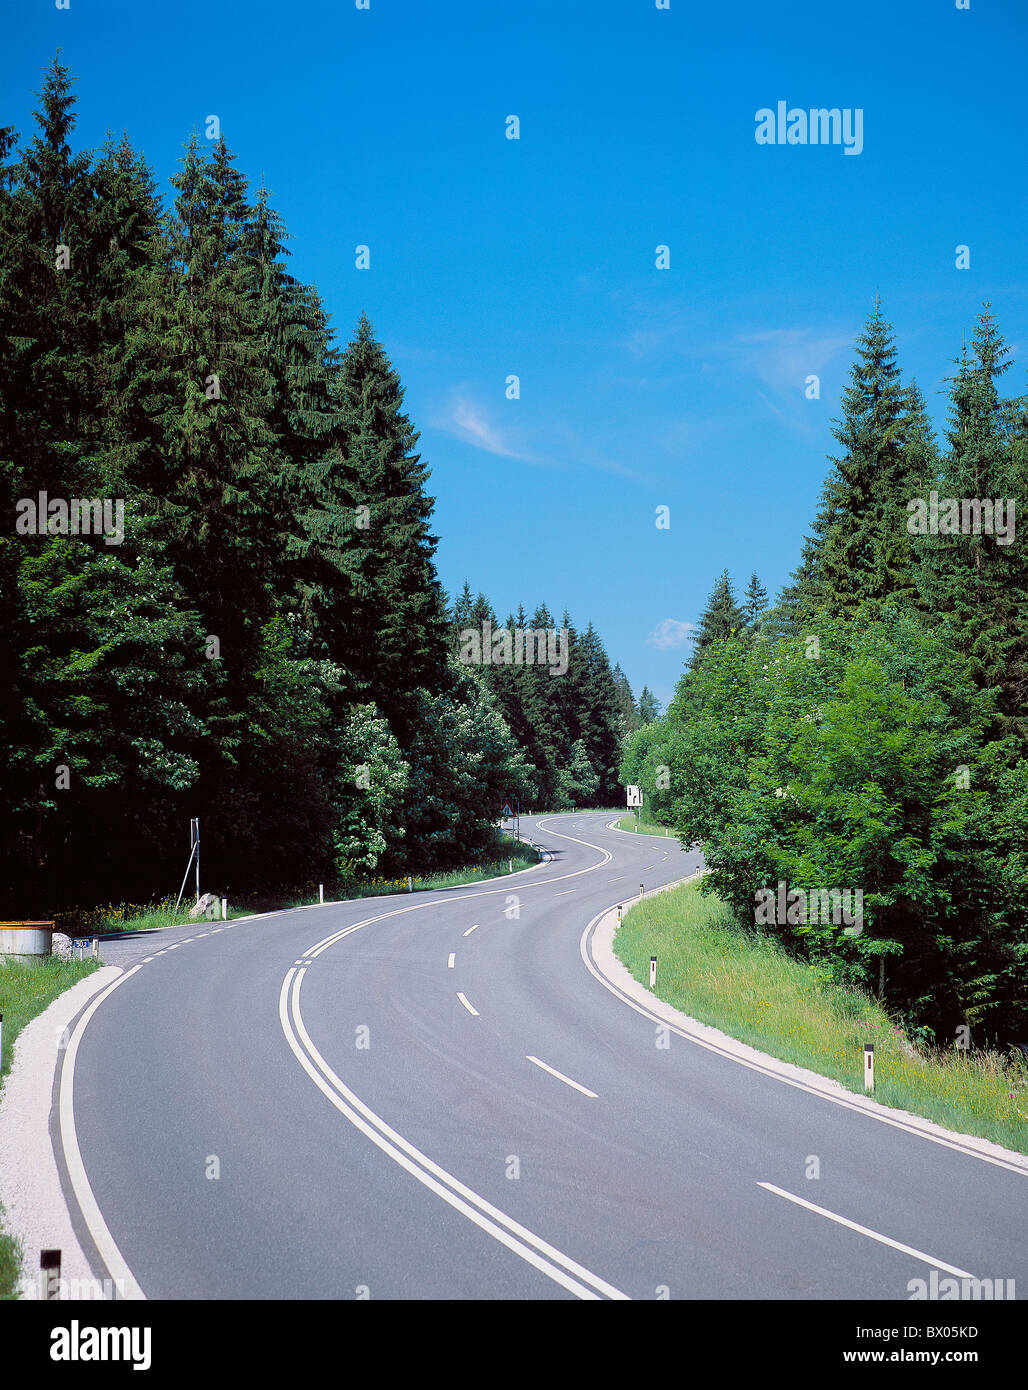 country road street dreispurig curves wood forest empty empty Stock Photo